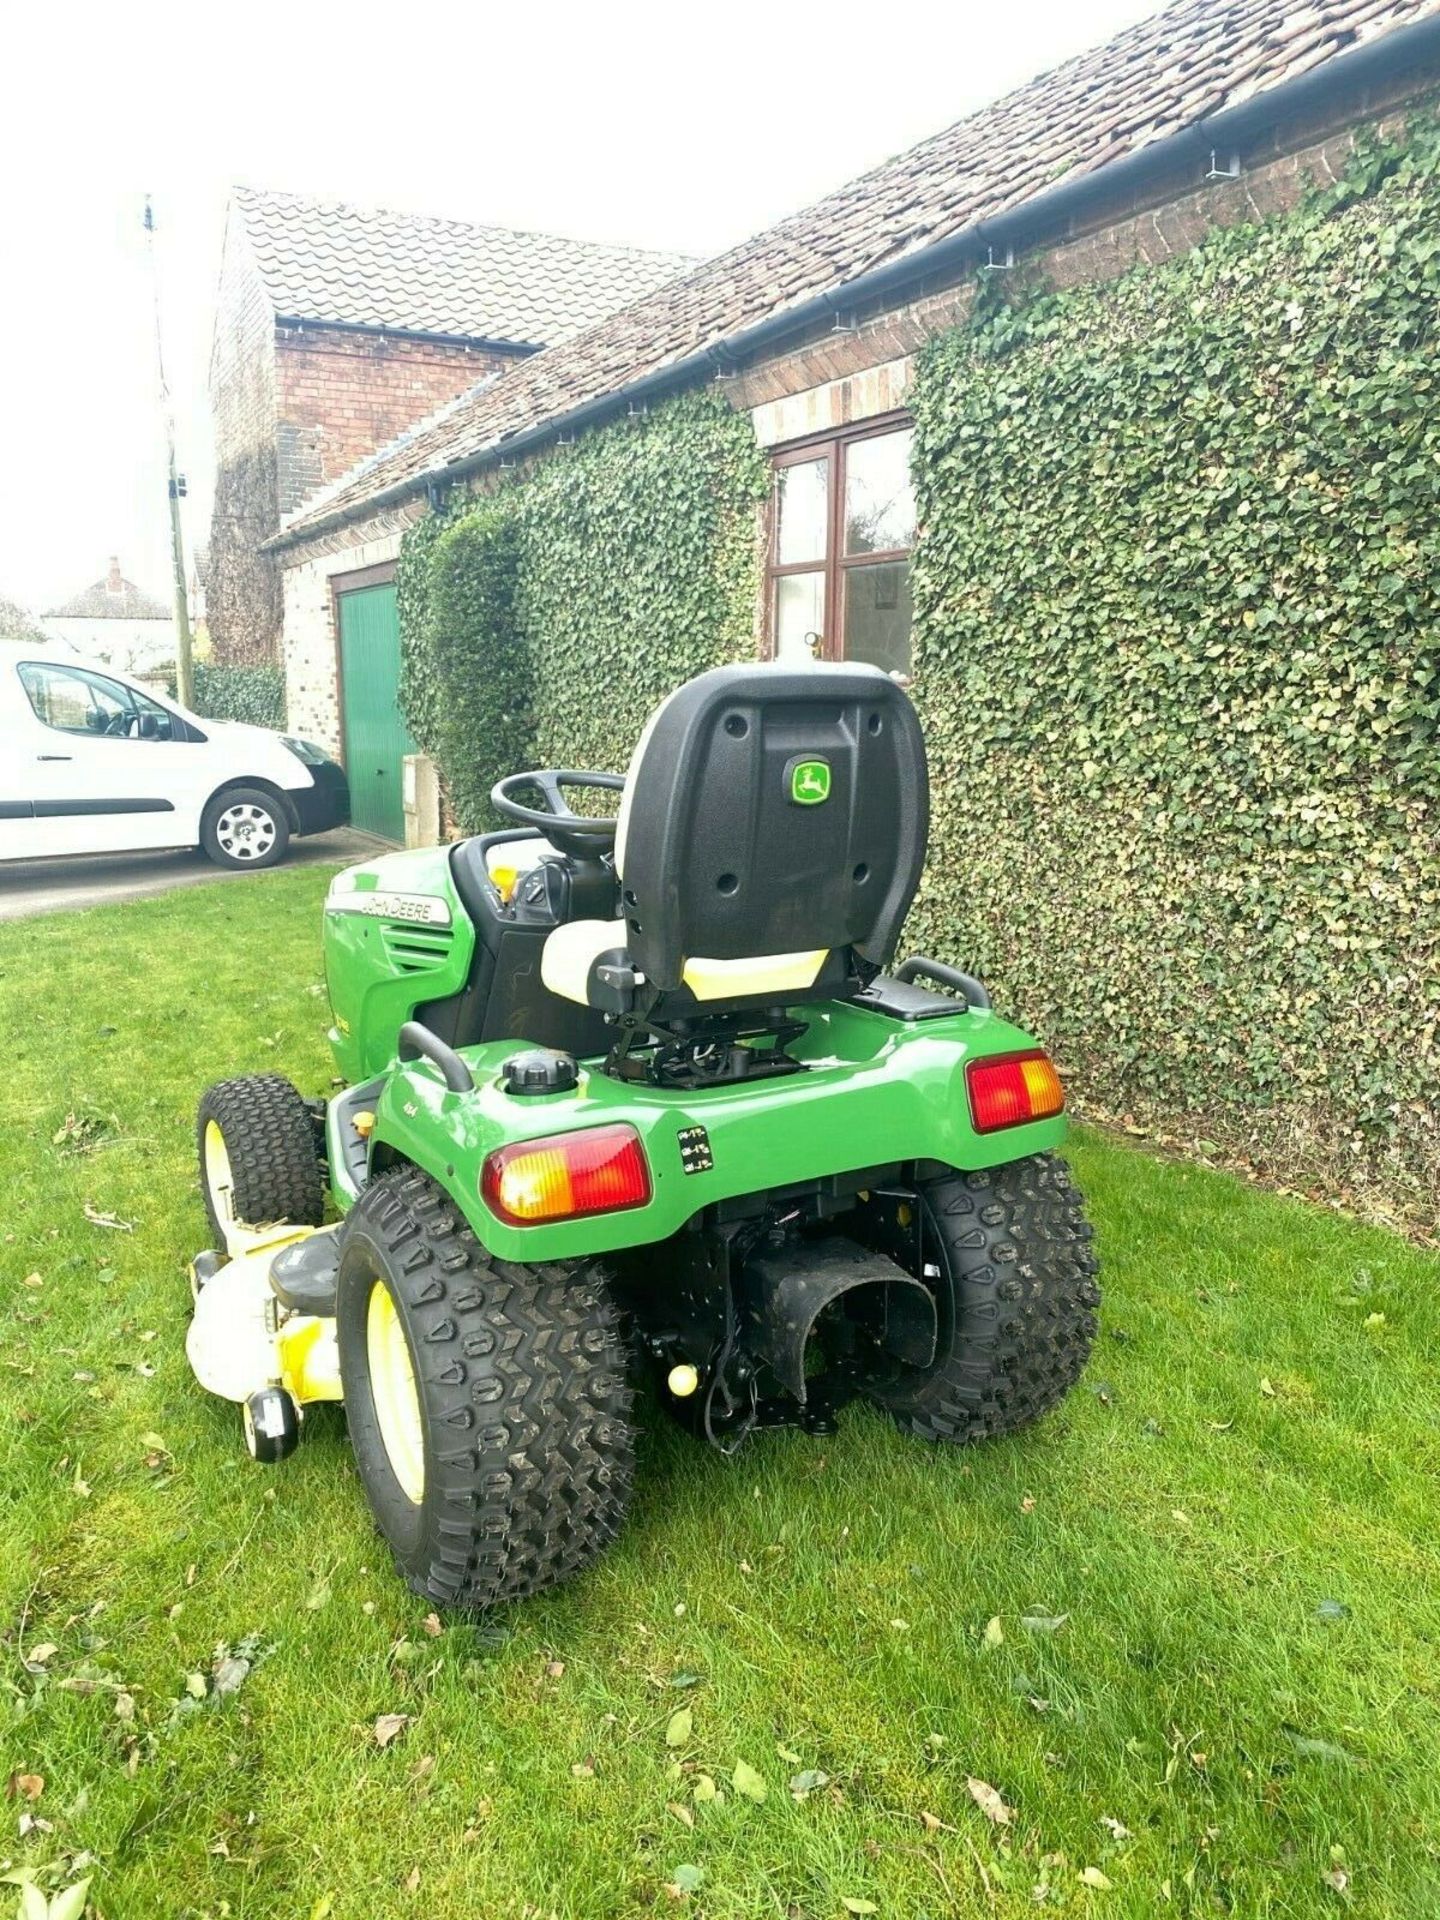 JOHN DEERE X748, 4 WHEEL DRIVE, HYDROSTATIC DRIVE, ONLY 699 HOURS, IMMACULATE CONDITION *PLUS VAT* - Image 5 of 8